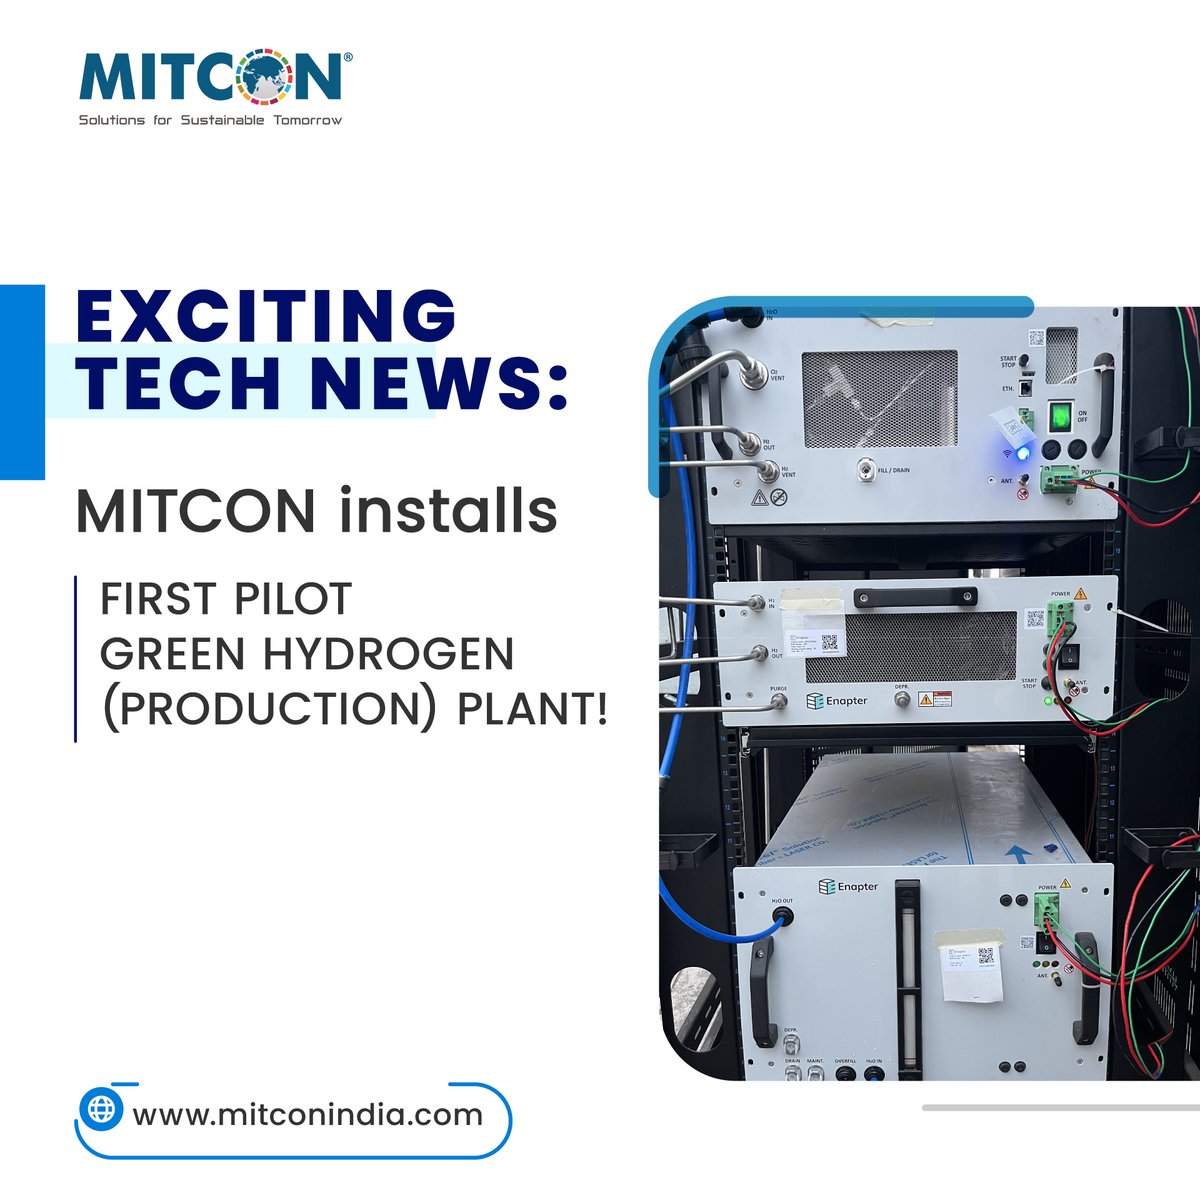 #MITCON has successfully commissioned its 1st #GreenHydrogen (AEM Electrolyser from Enapter) plant! This project marks a significant milestone in our journey towards sustainable energy production. Stay tuned for more updates on our journey towards #sustainable energy!